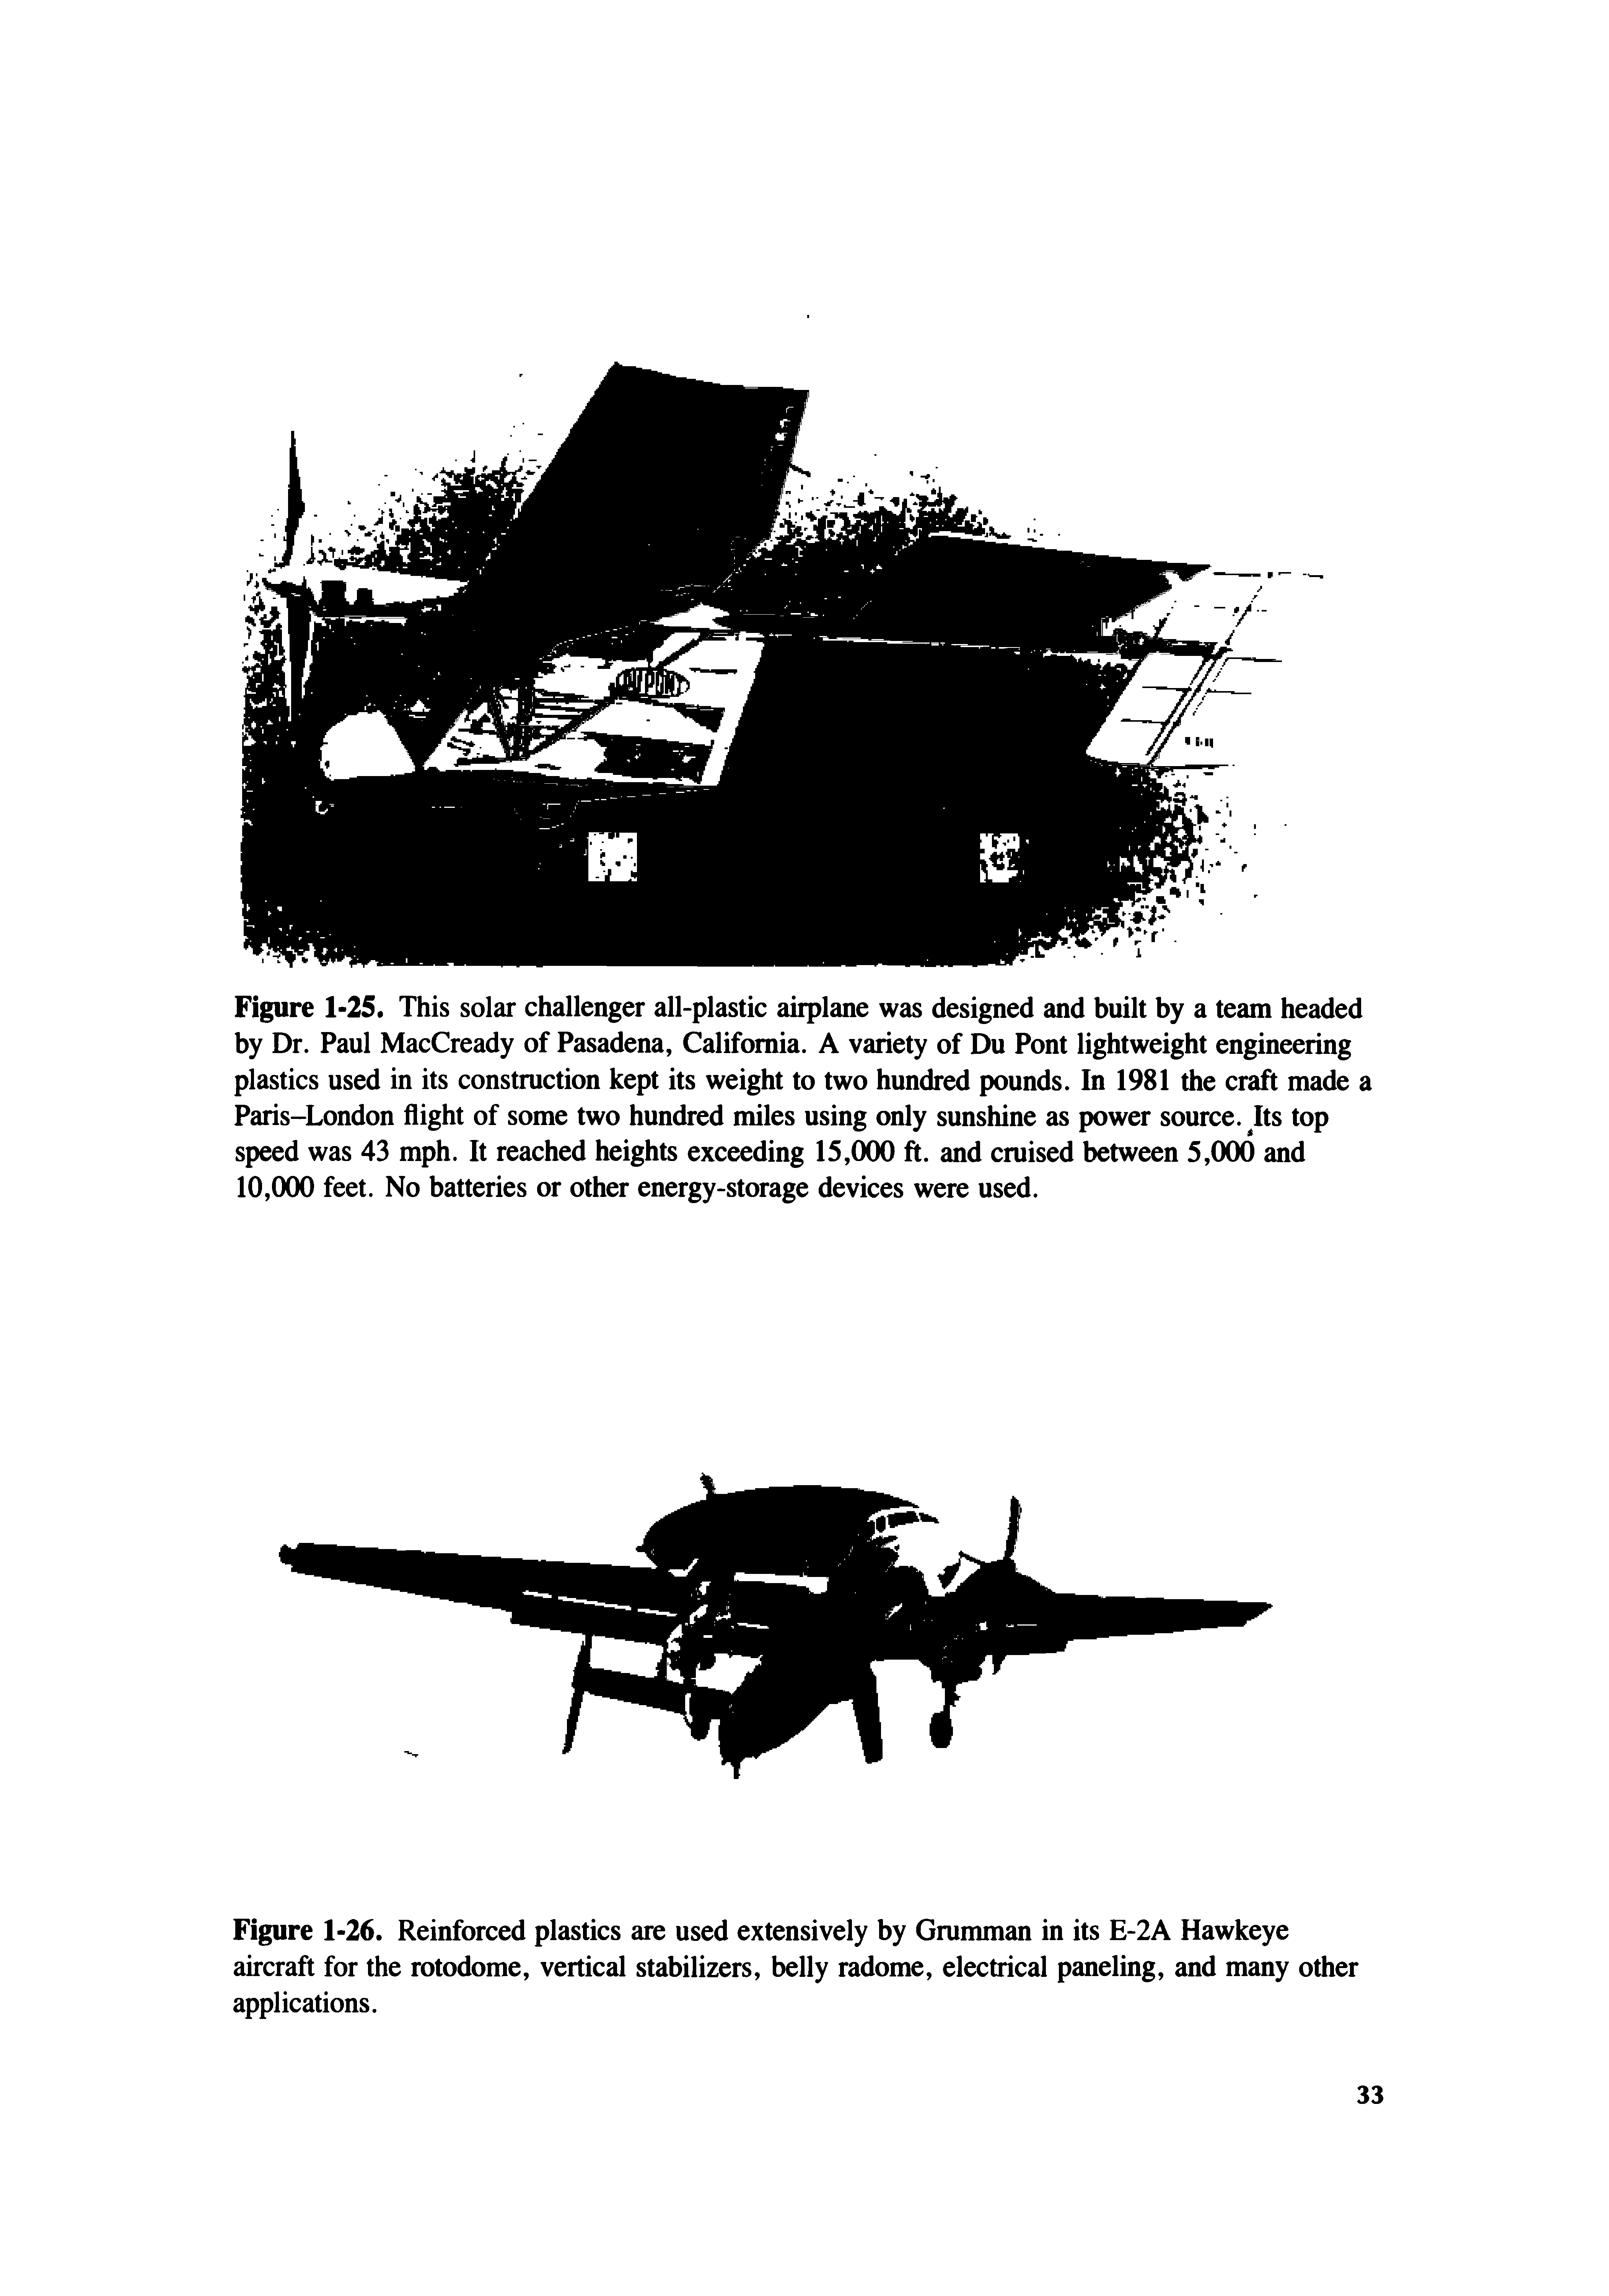 Figure 1-26. Reinforced plastics are used extensively by Grumman in its E-2A Hawkeye aircraft for the rotodome, vertical stabilizers, belly radome, electrical paneling, and many other applications.